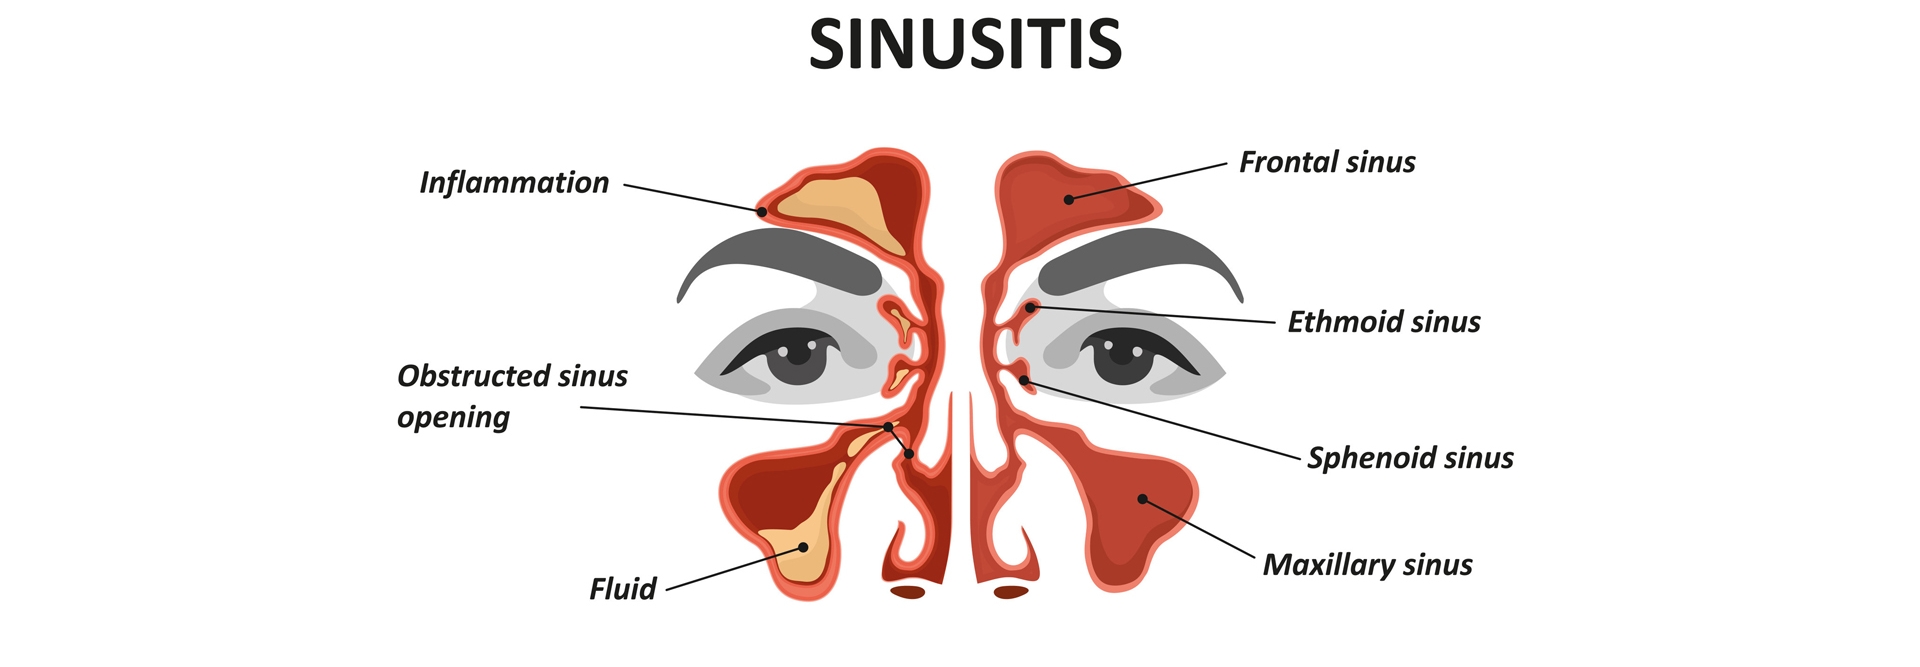 Sinus Headaches Can Be Related to Food Sensitivity- Self Healing Course